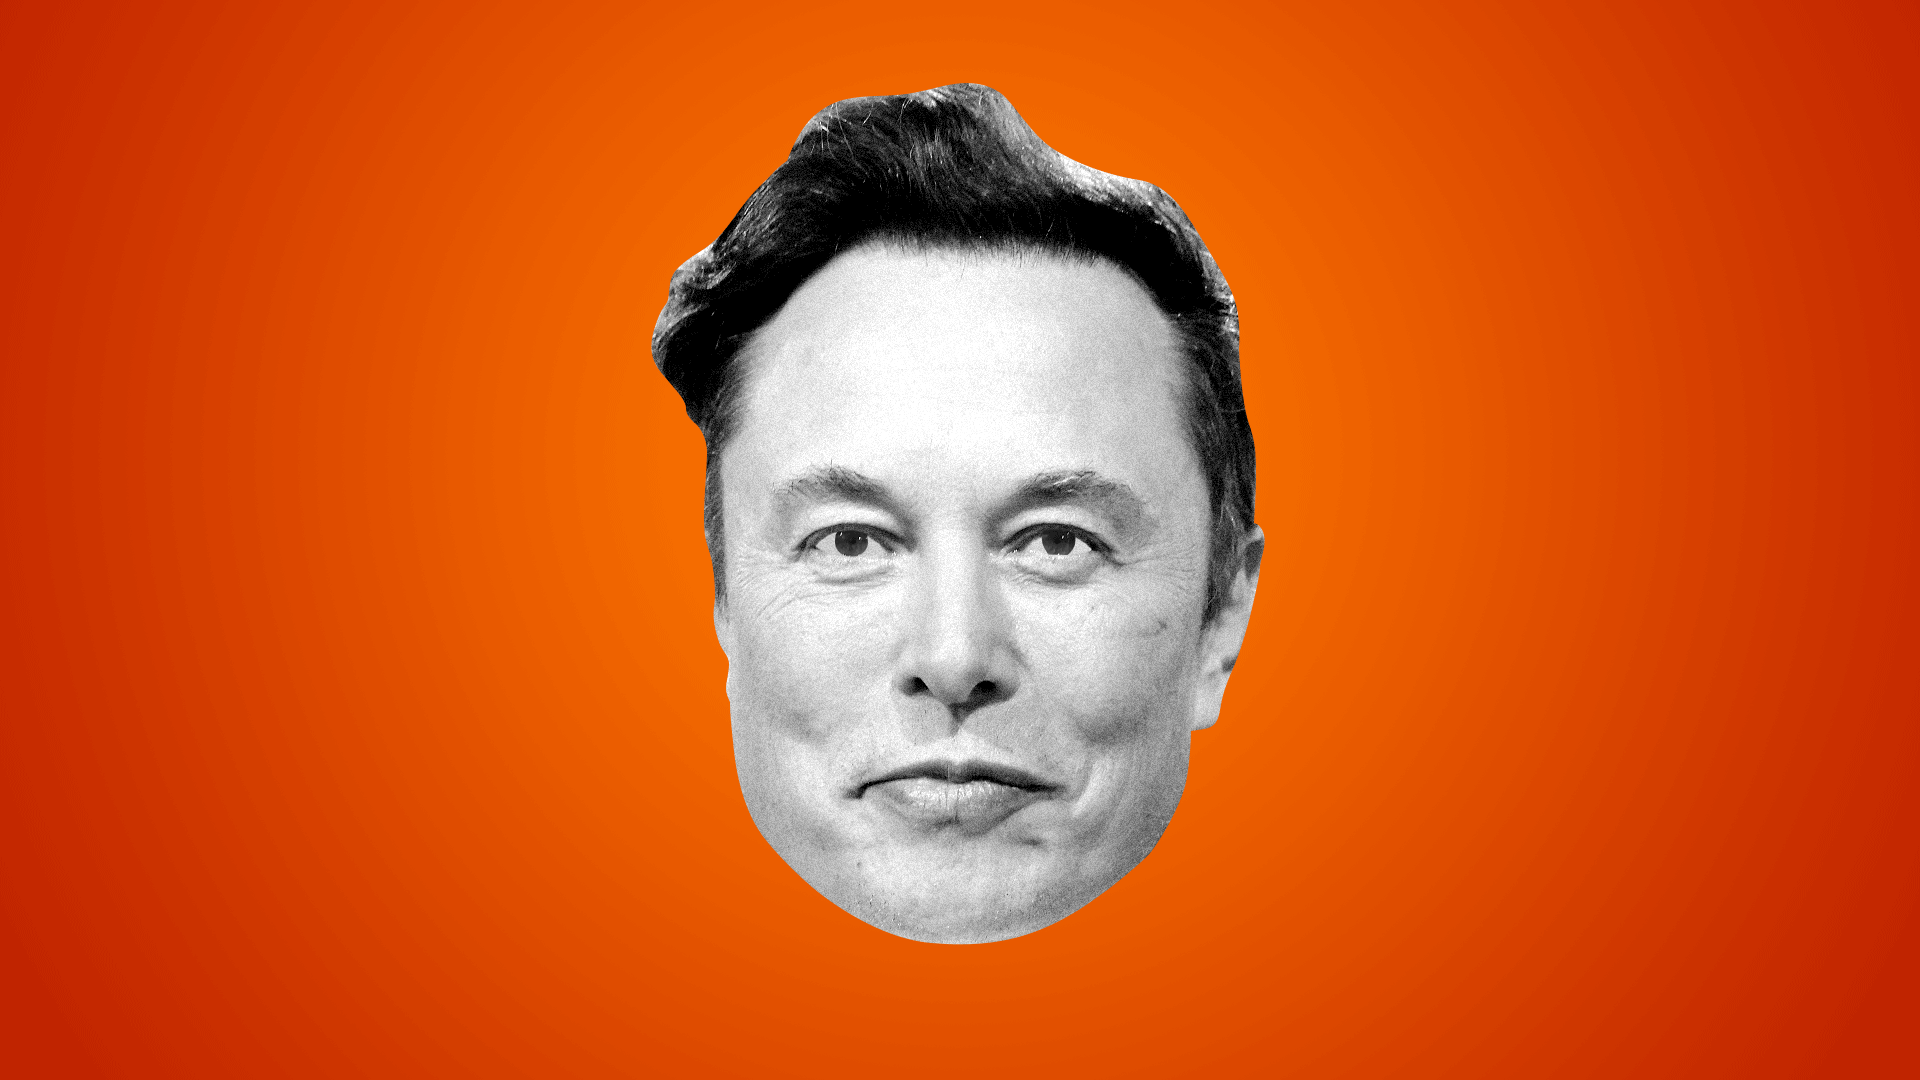 Elon Musk could move Twitter to Austin - Axios Austin